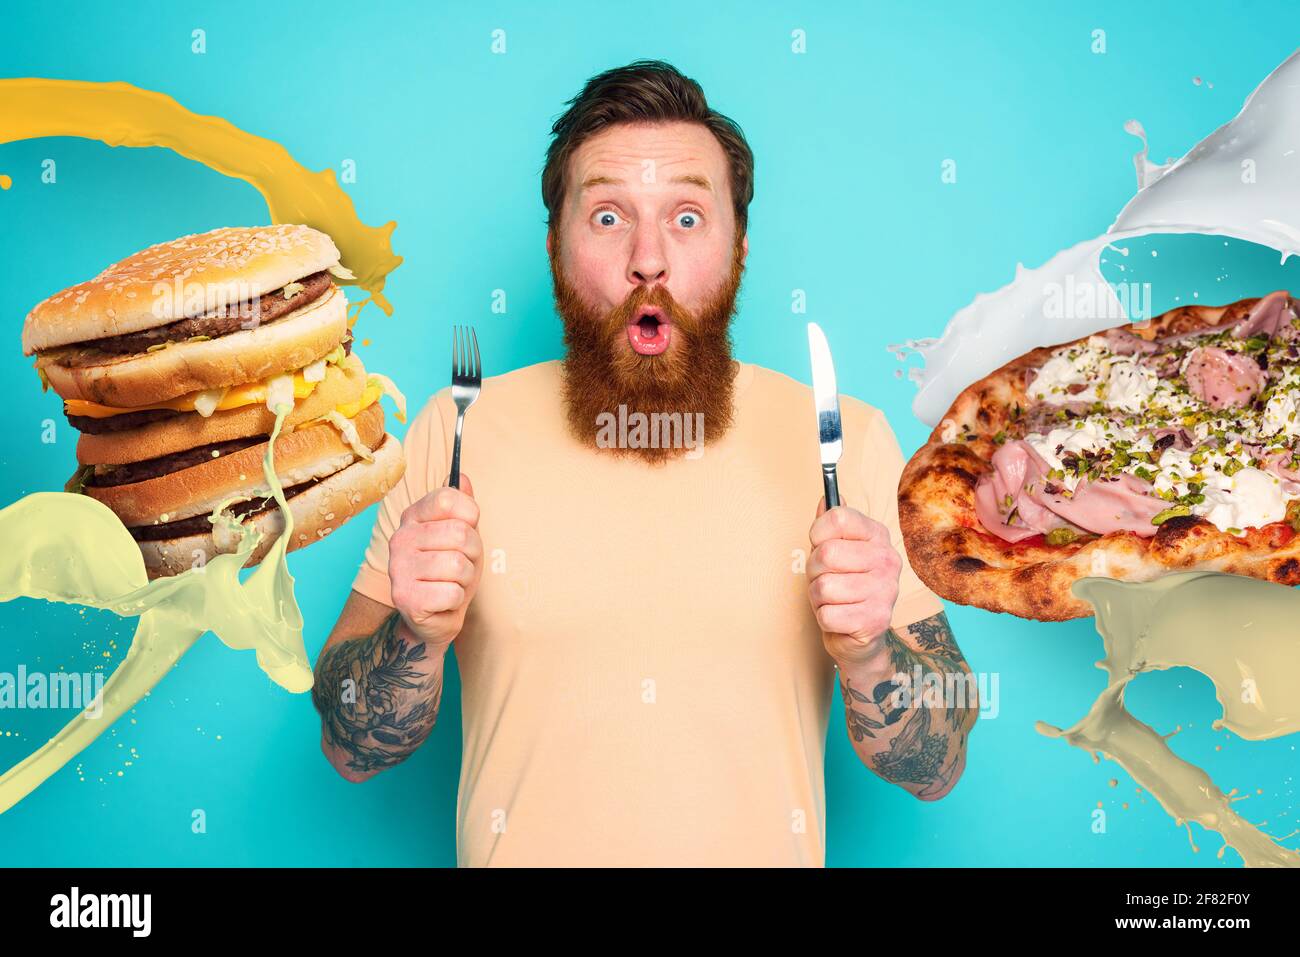 Man with tattoos is ready to eat sandwich and pizza with cutlery in hand. cyan background Stock Photo